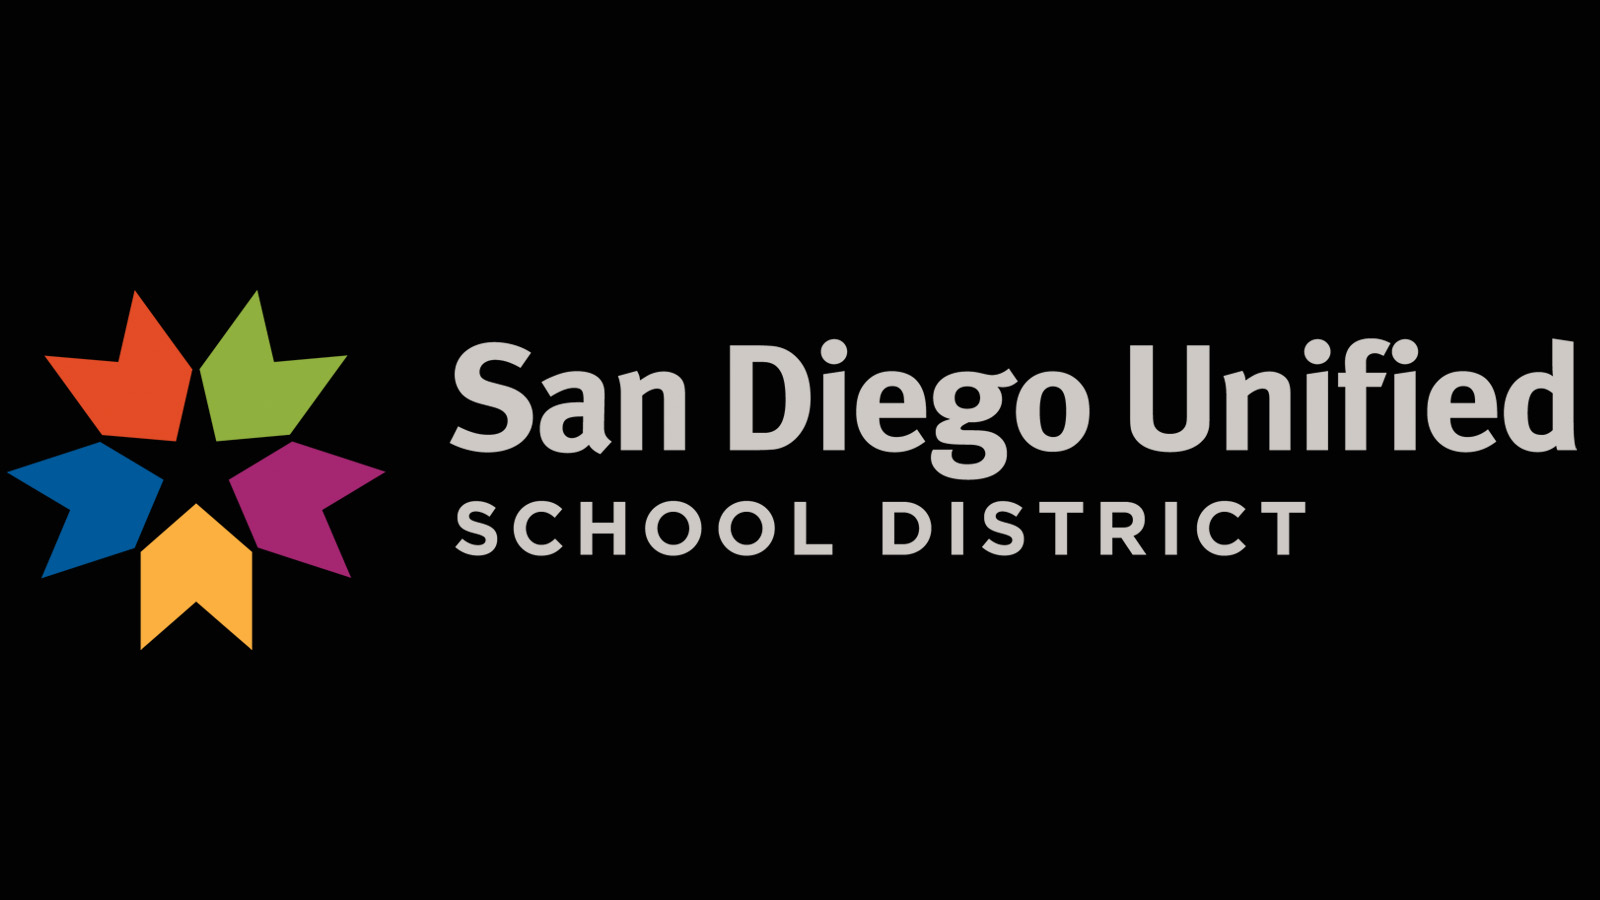 The San Diego Unified School District logo. Courtesy image